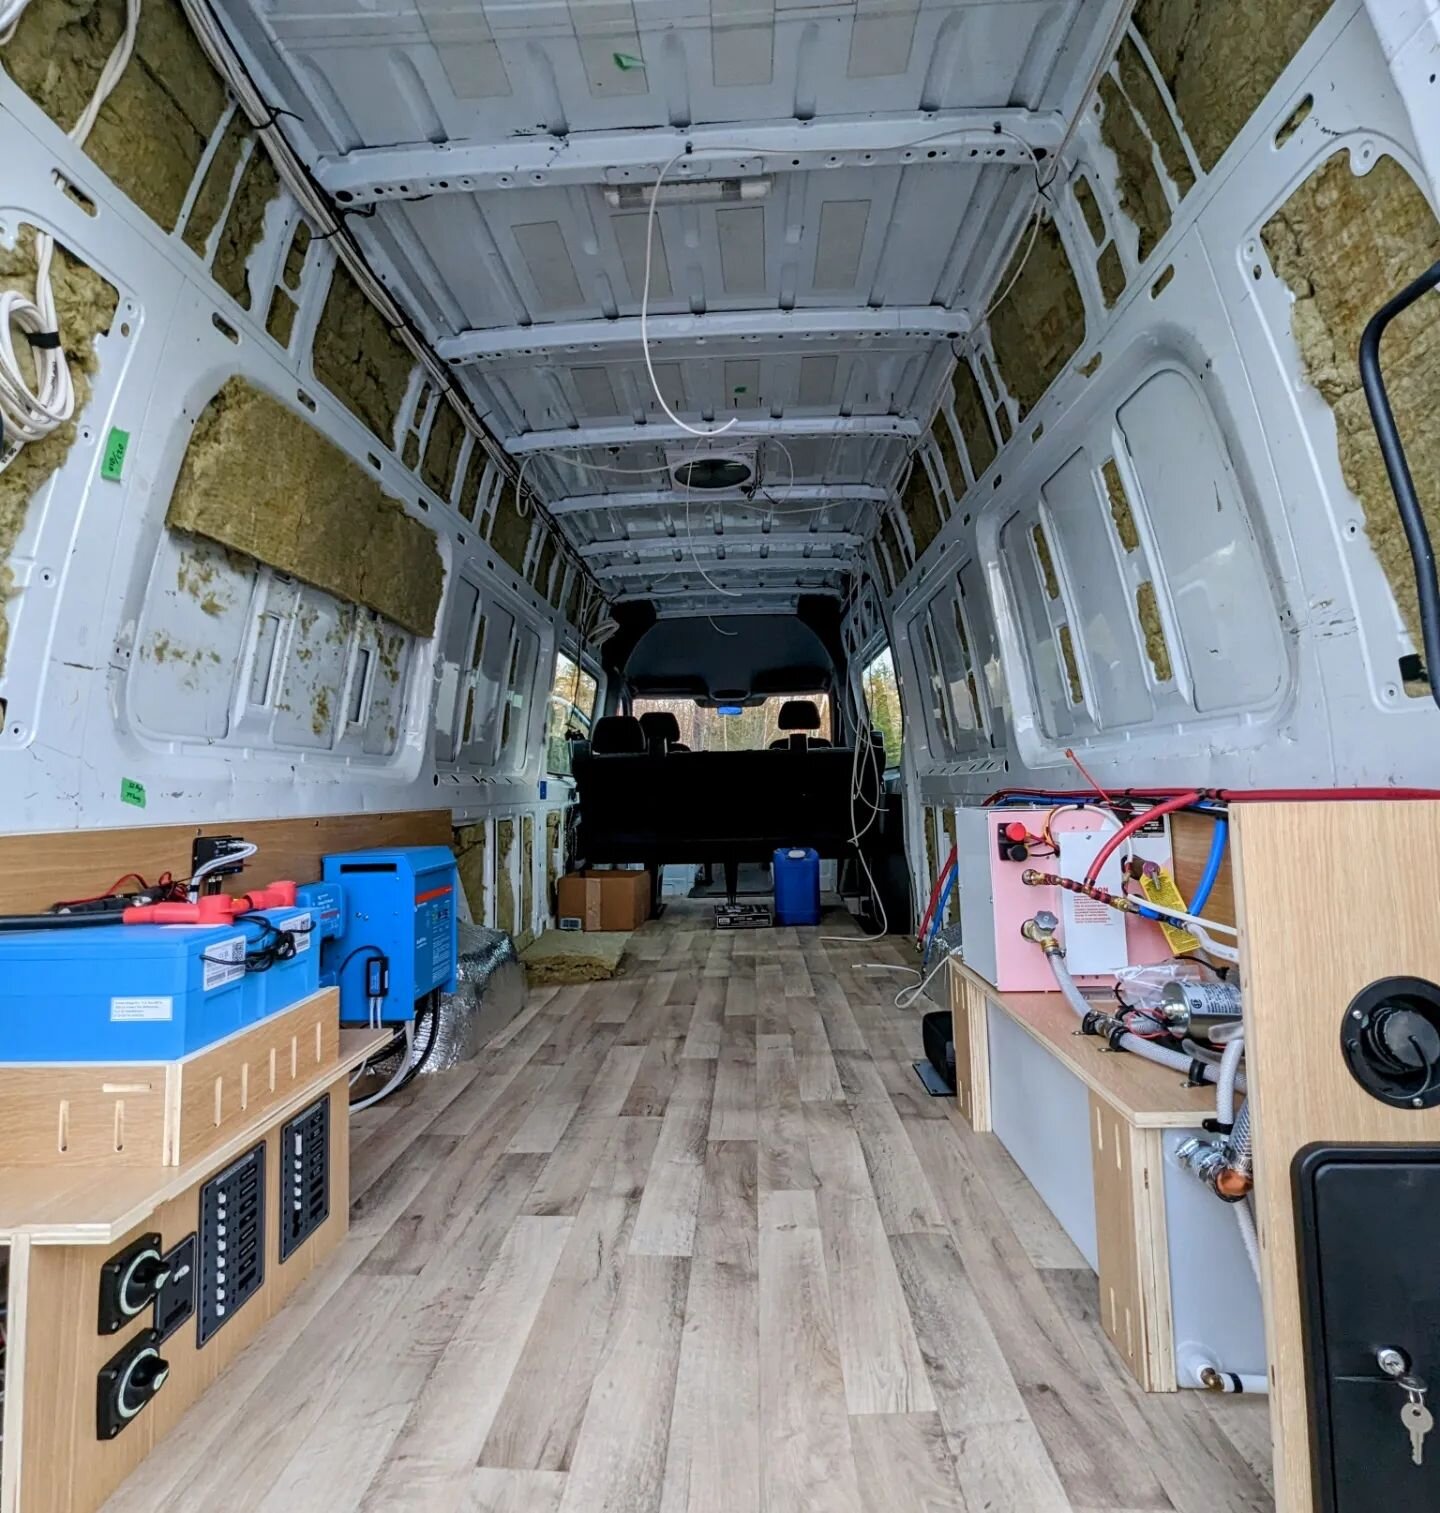 DIY Collaboration Project: 
The owners insulated their van and installed their own floor. Ray Outfitted the van with a MaxxAir fan, a robust off grid electrical system with solar, alternator and shore power charging capabilities, an Eberspaecher dies